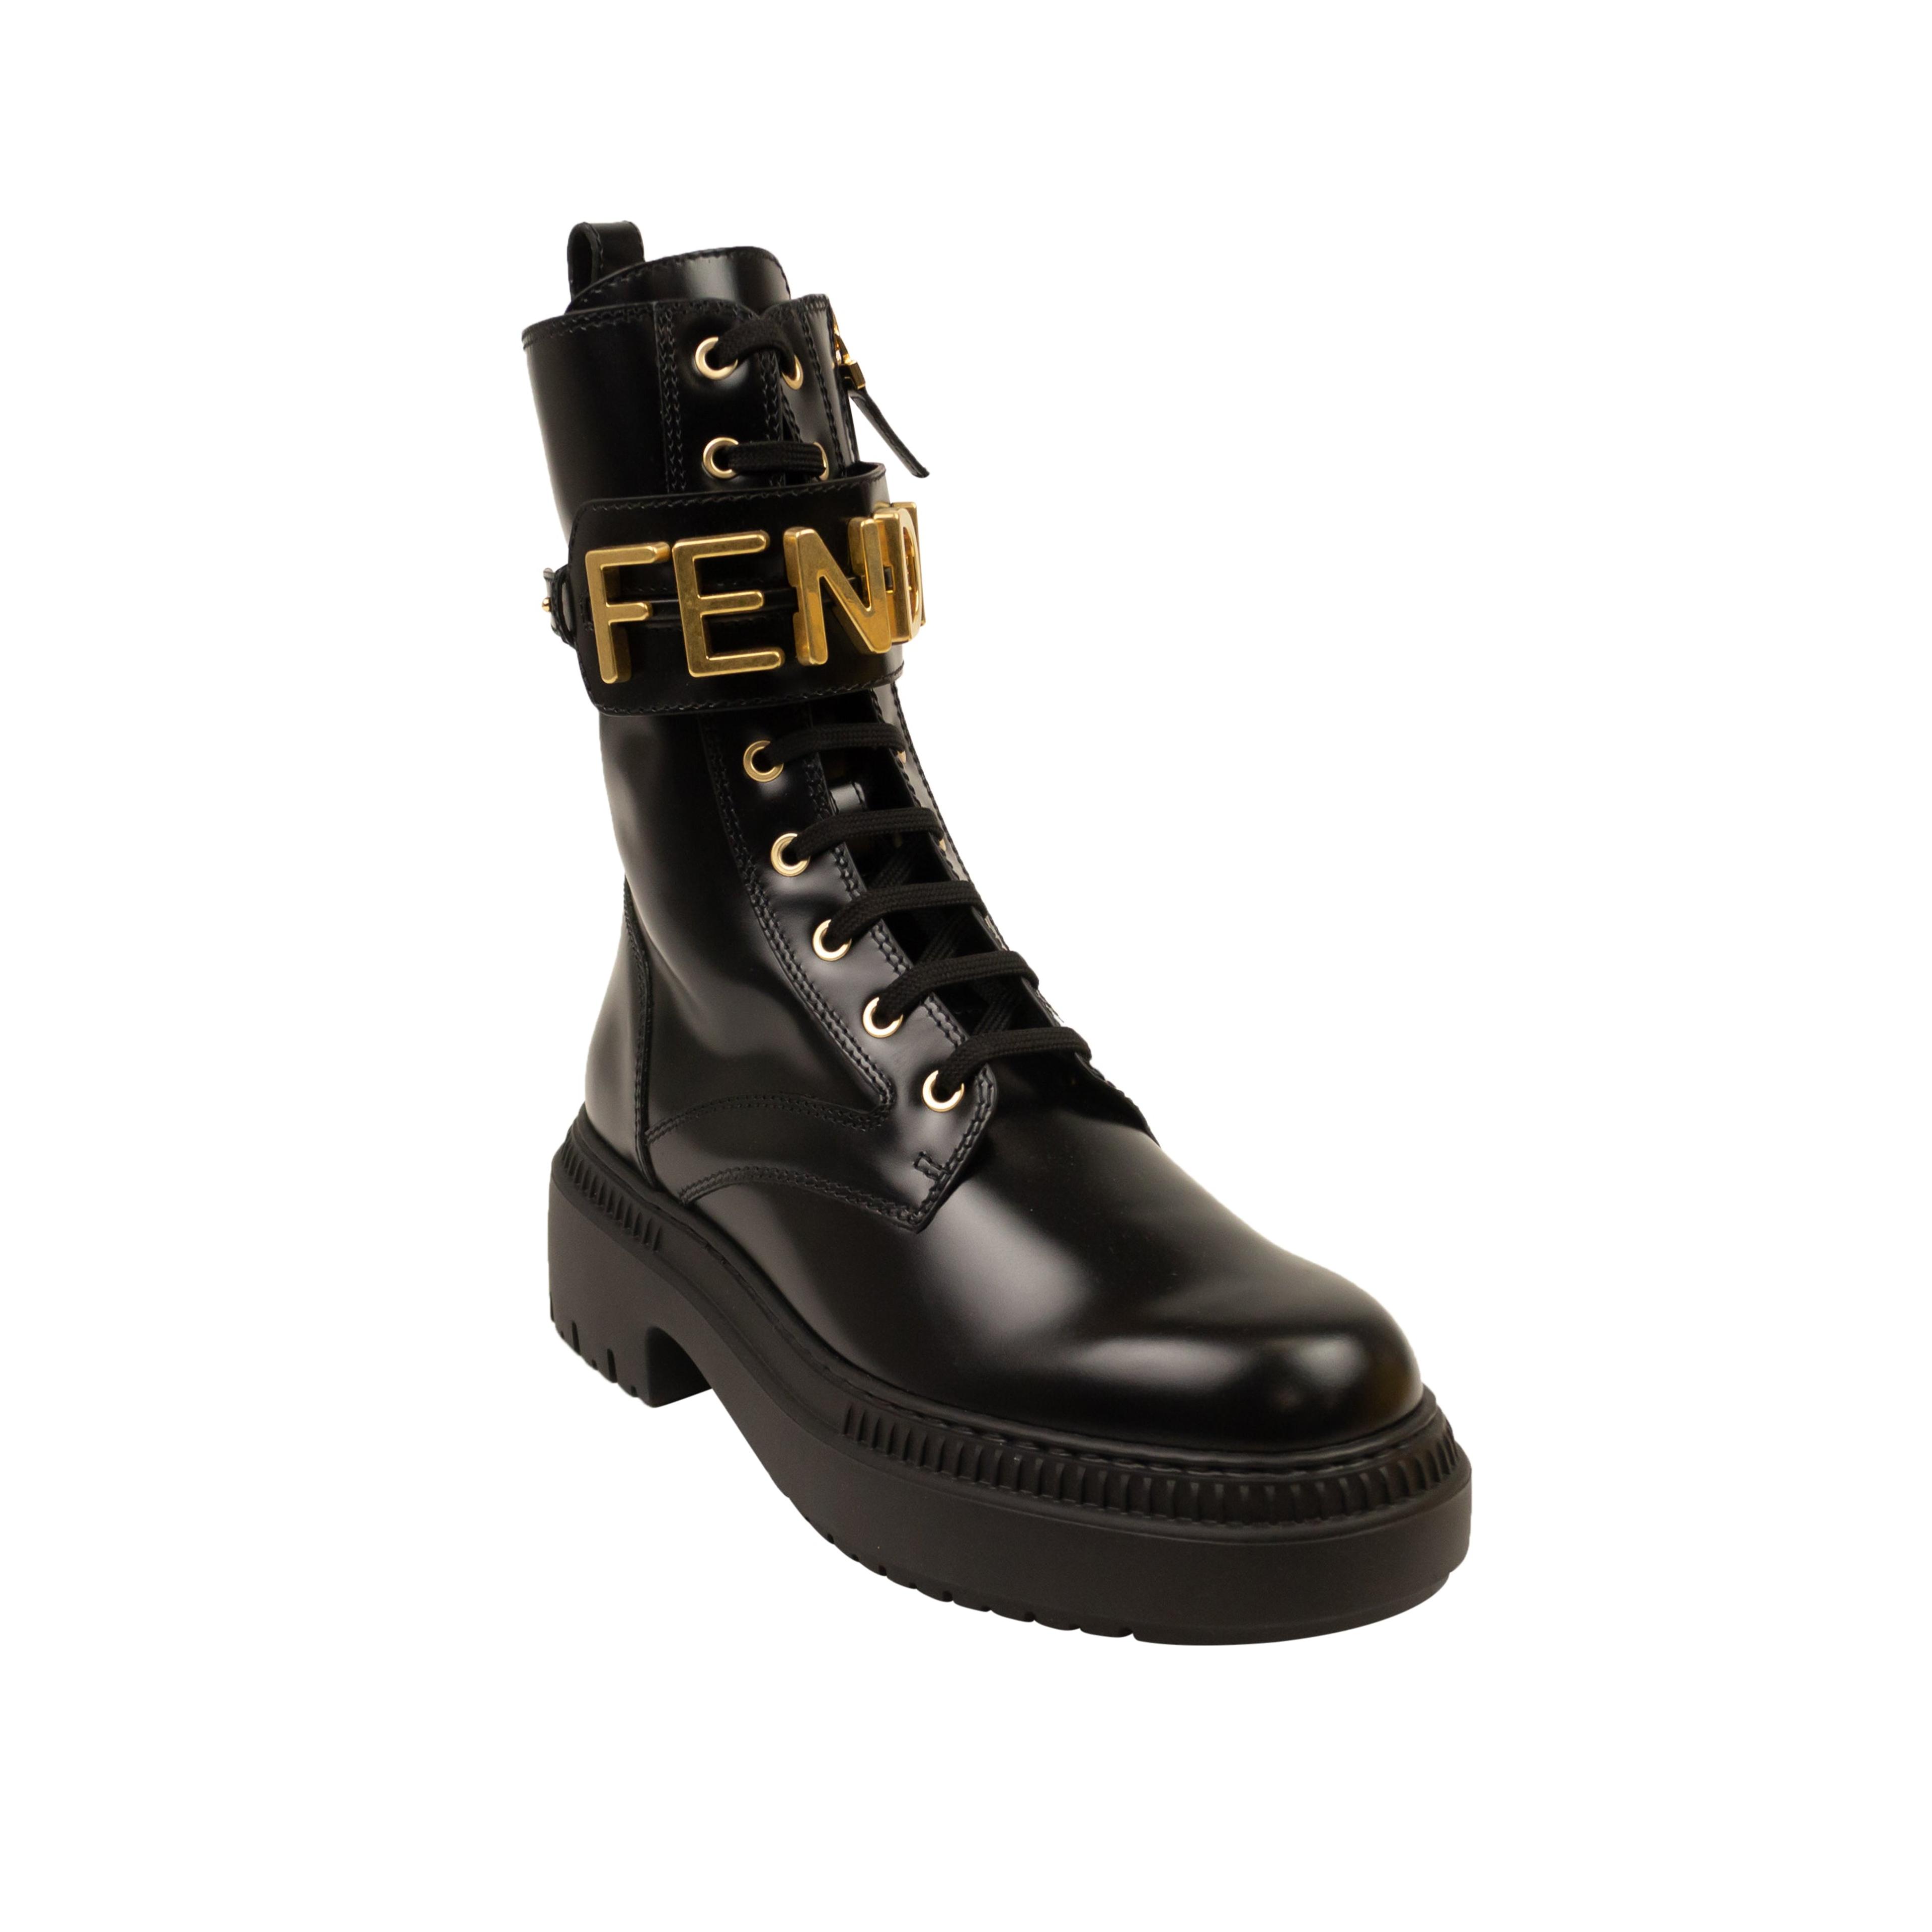 Alternate View 1 of Black Leather Fendigraphy Combat Boots